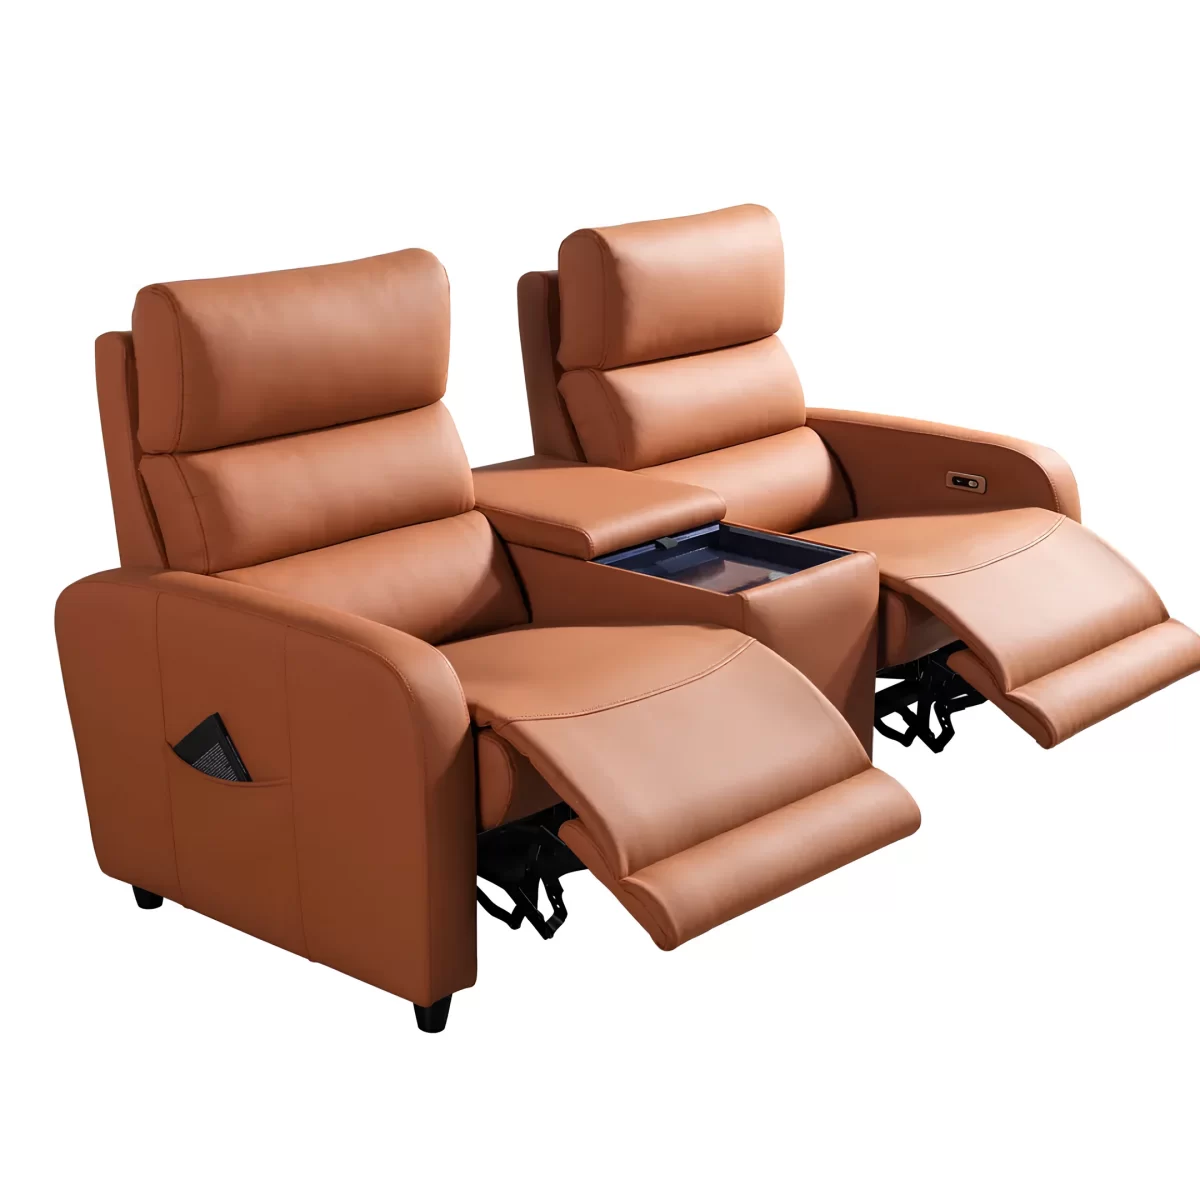 mari double reclining sofa electric recliner seat for home theater3